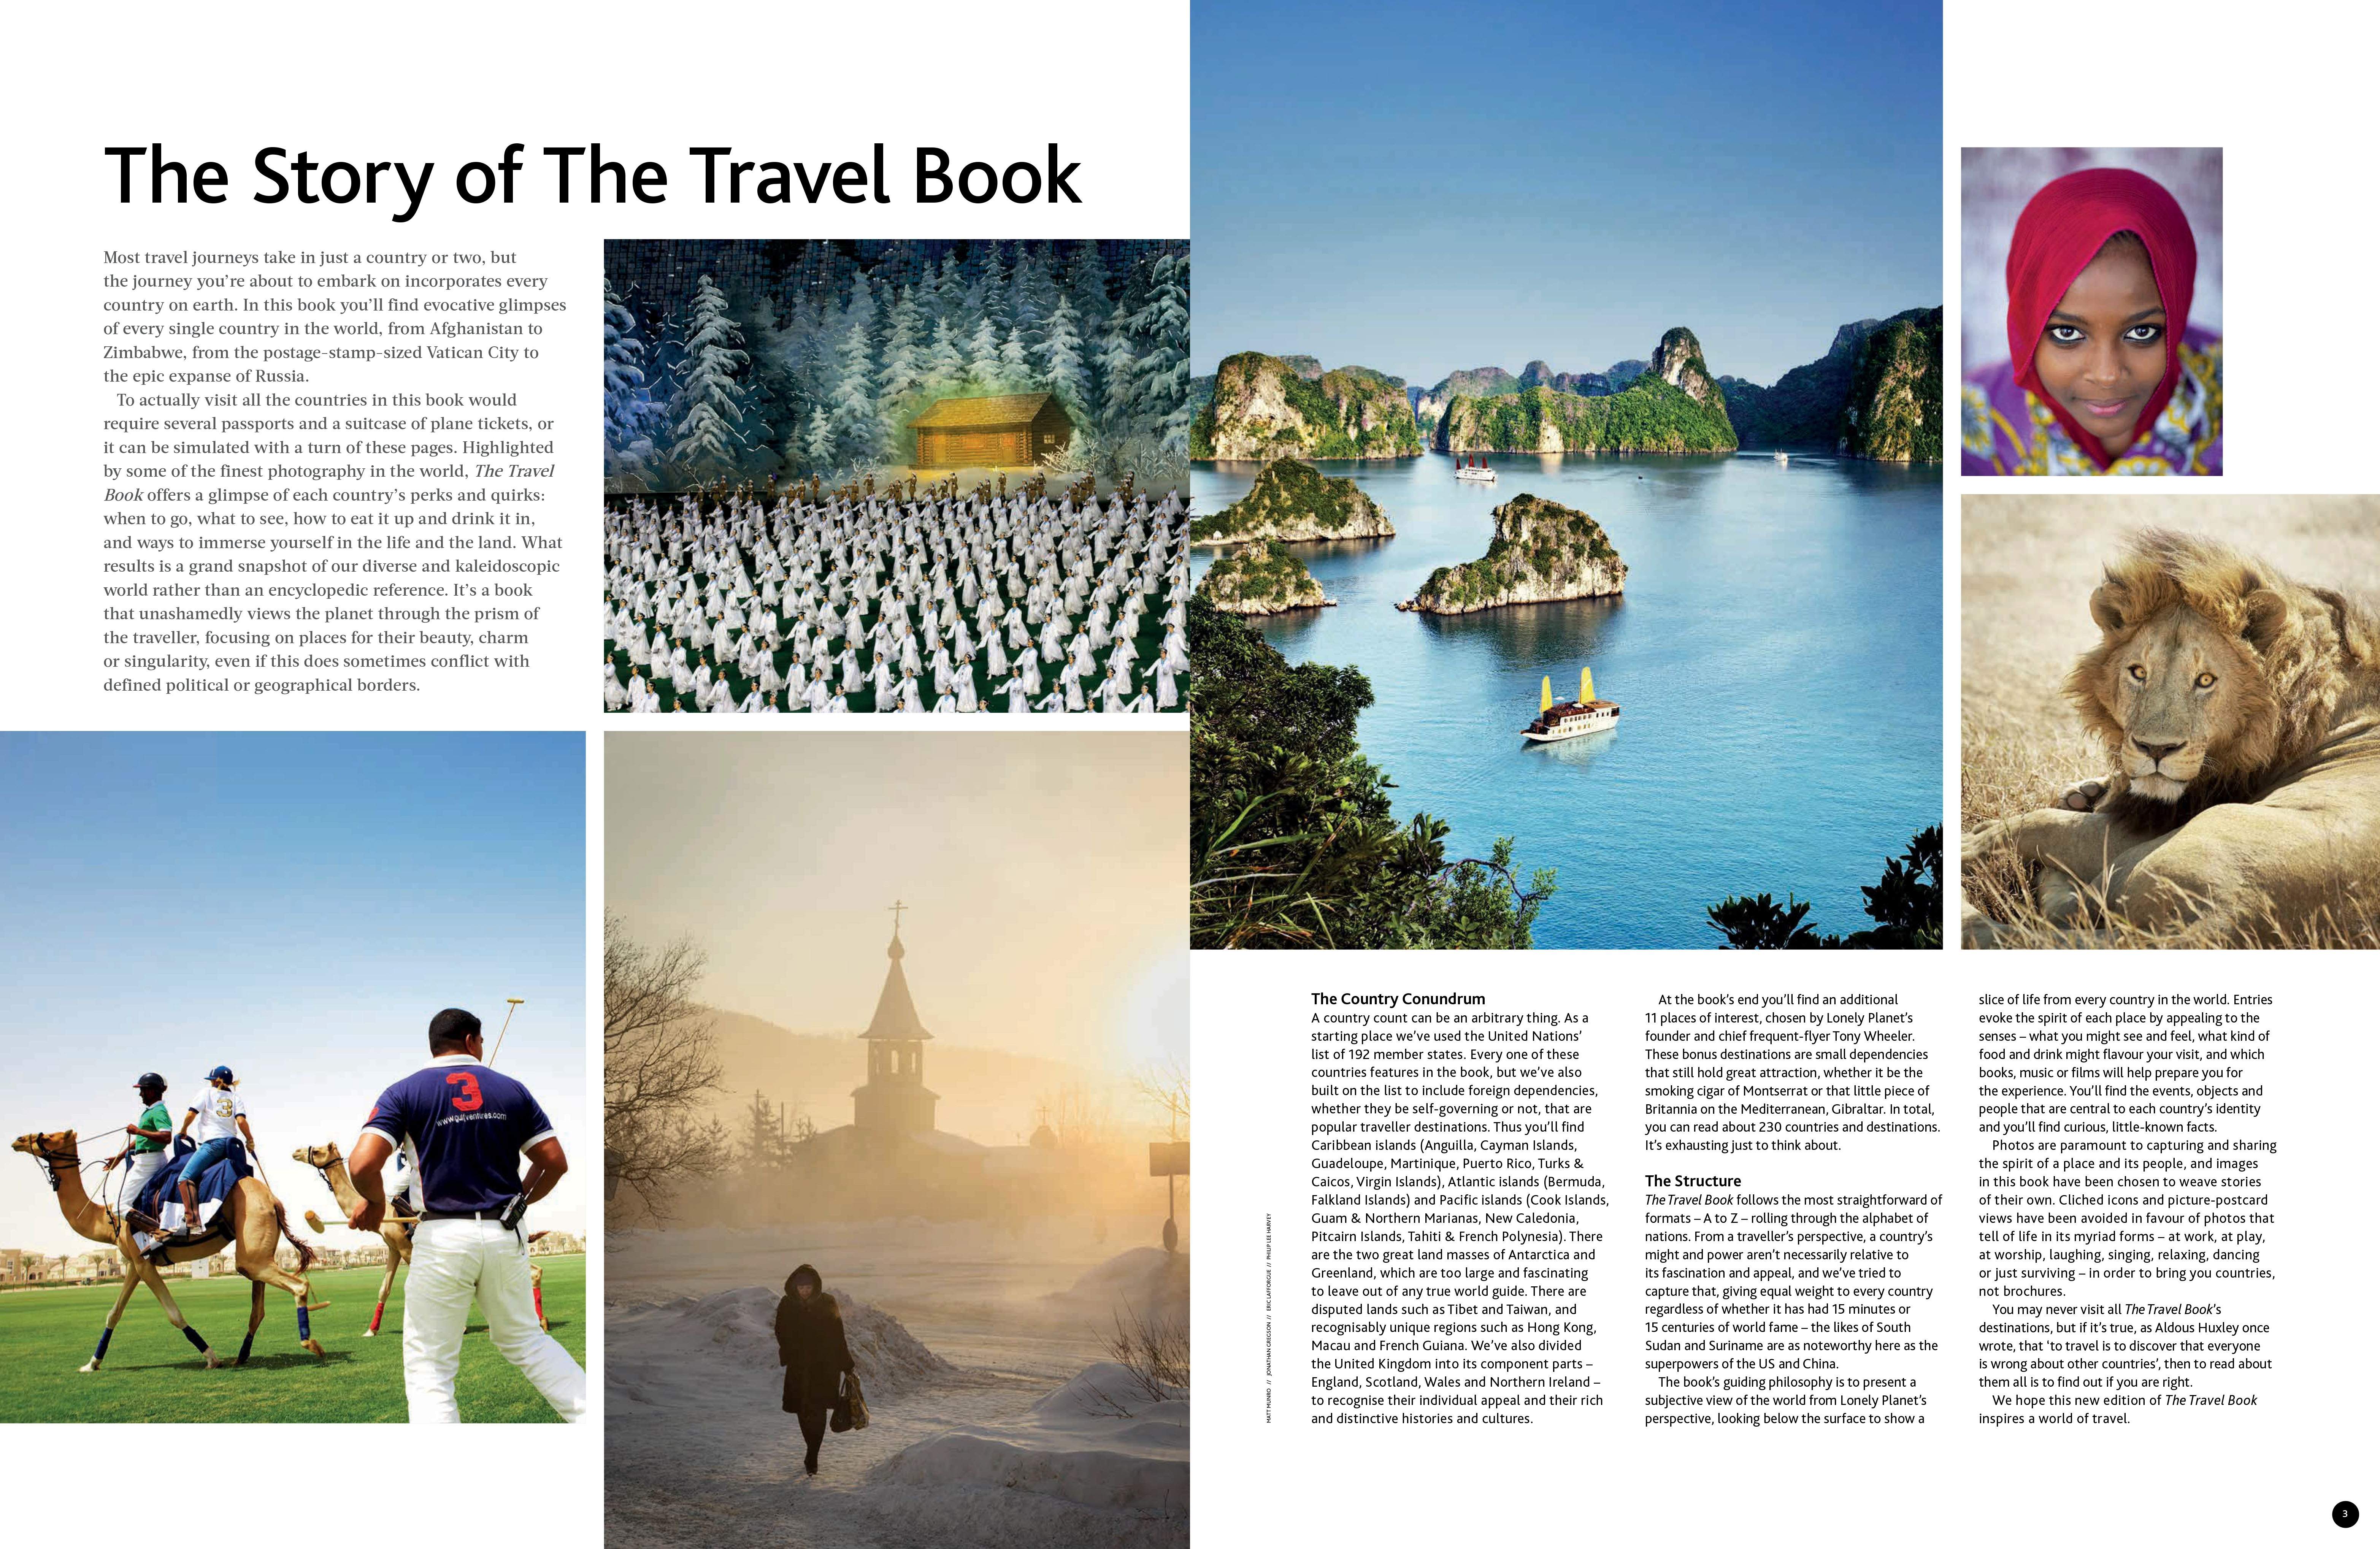 Lonely Planet: The Travel Book: A Journey Through Every Country in The World